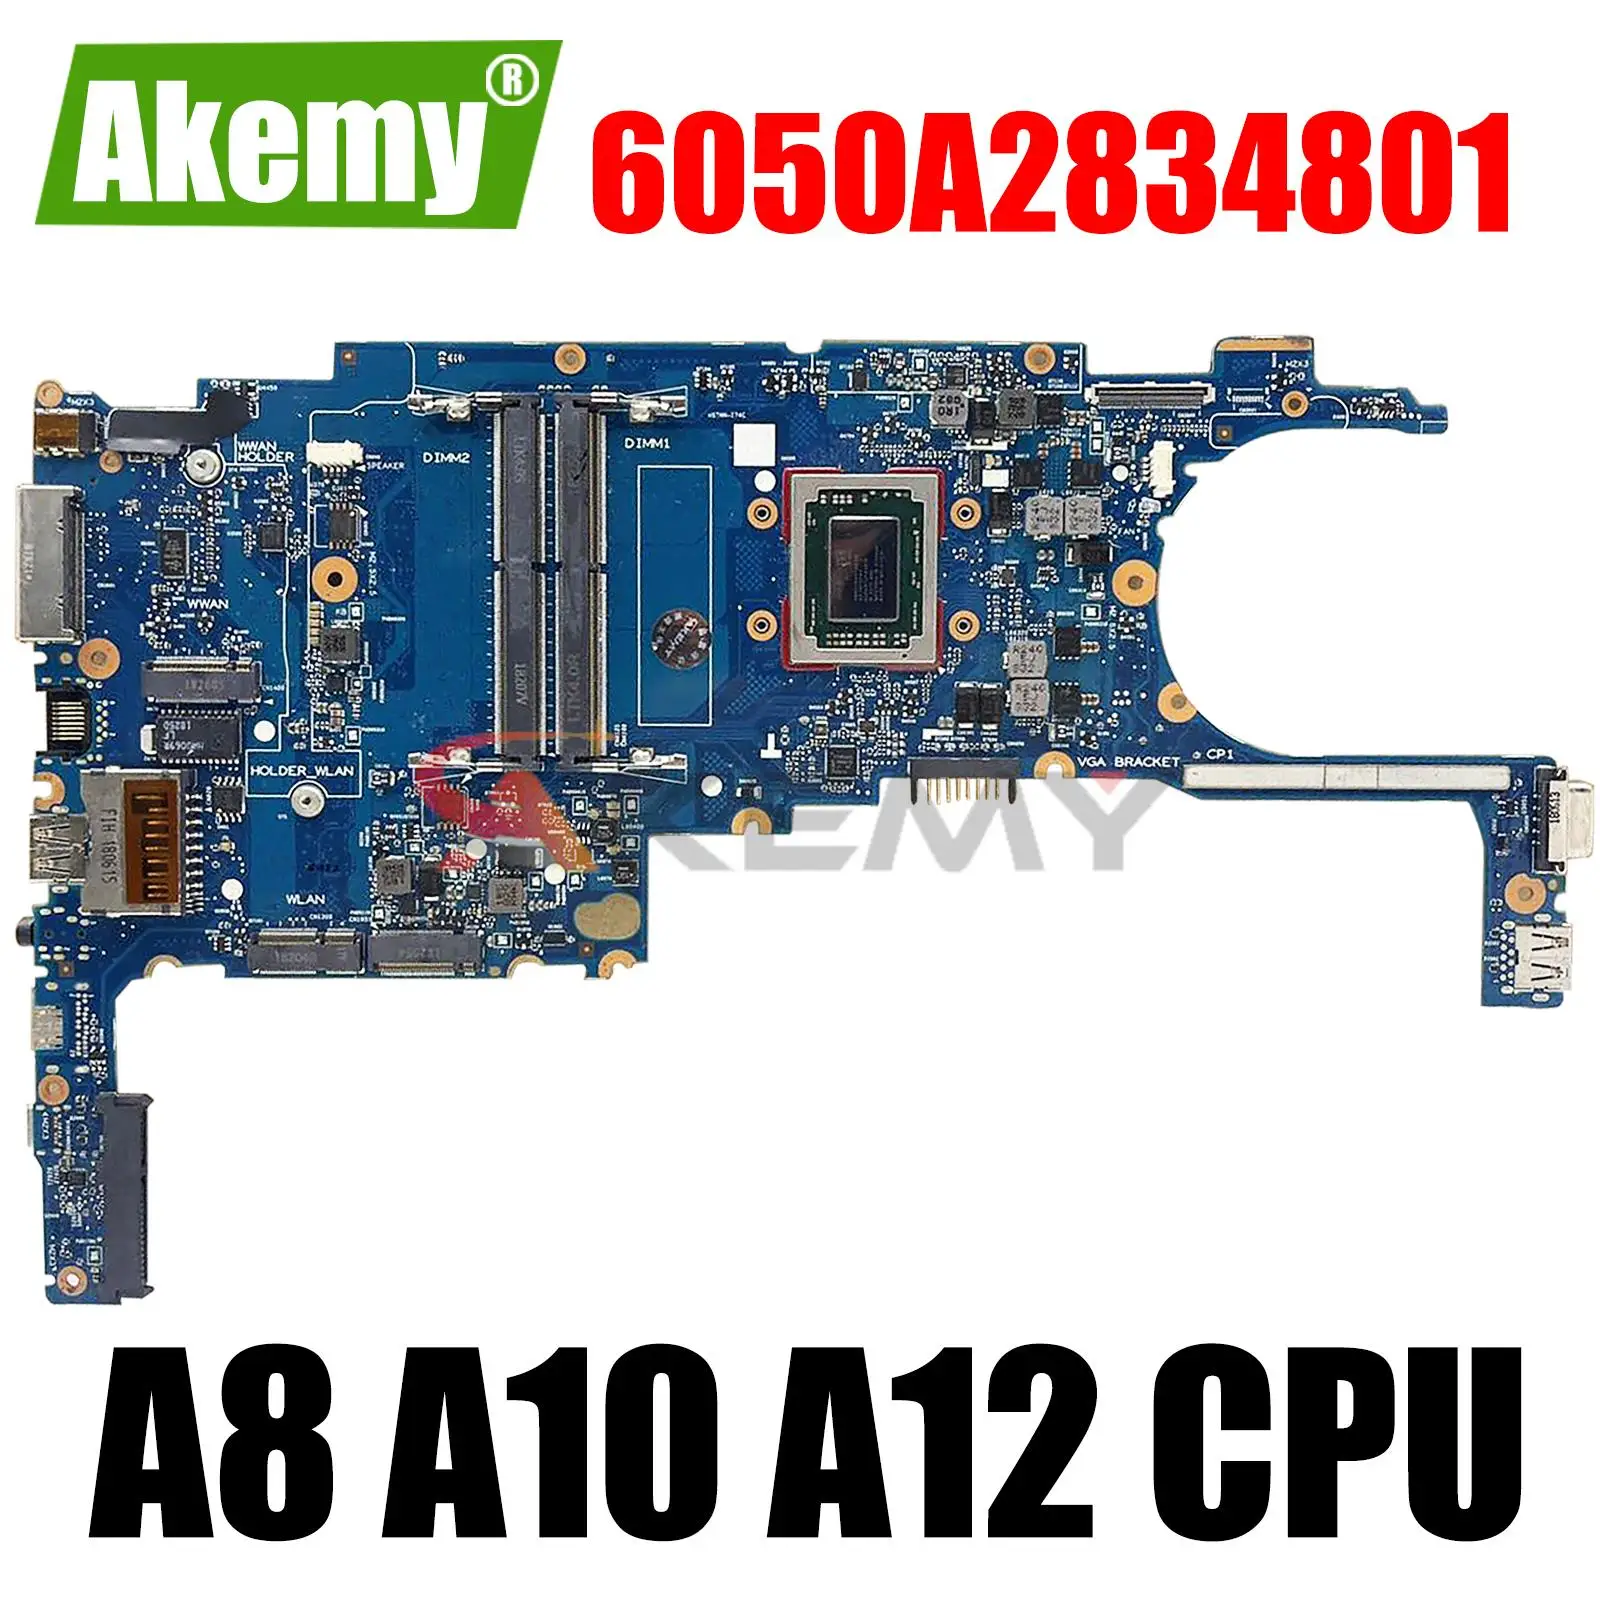 

for HP EliteBook 725 G4 Laptop Motherboard Mainboard 6050A2834801 Motherboard with A8 A10 A12 AMD CPU DDR4